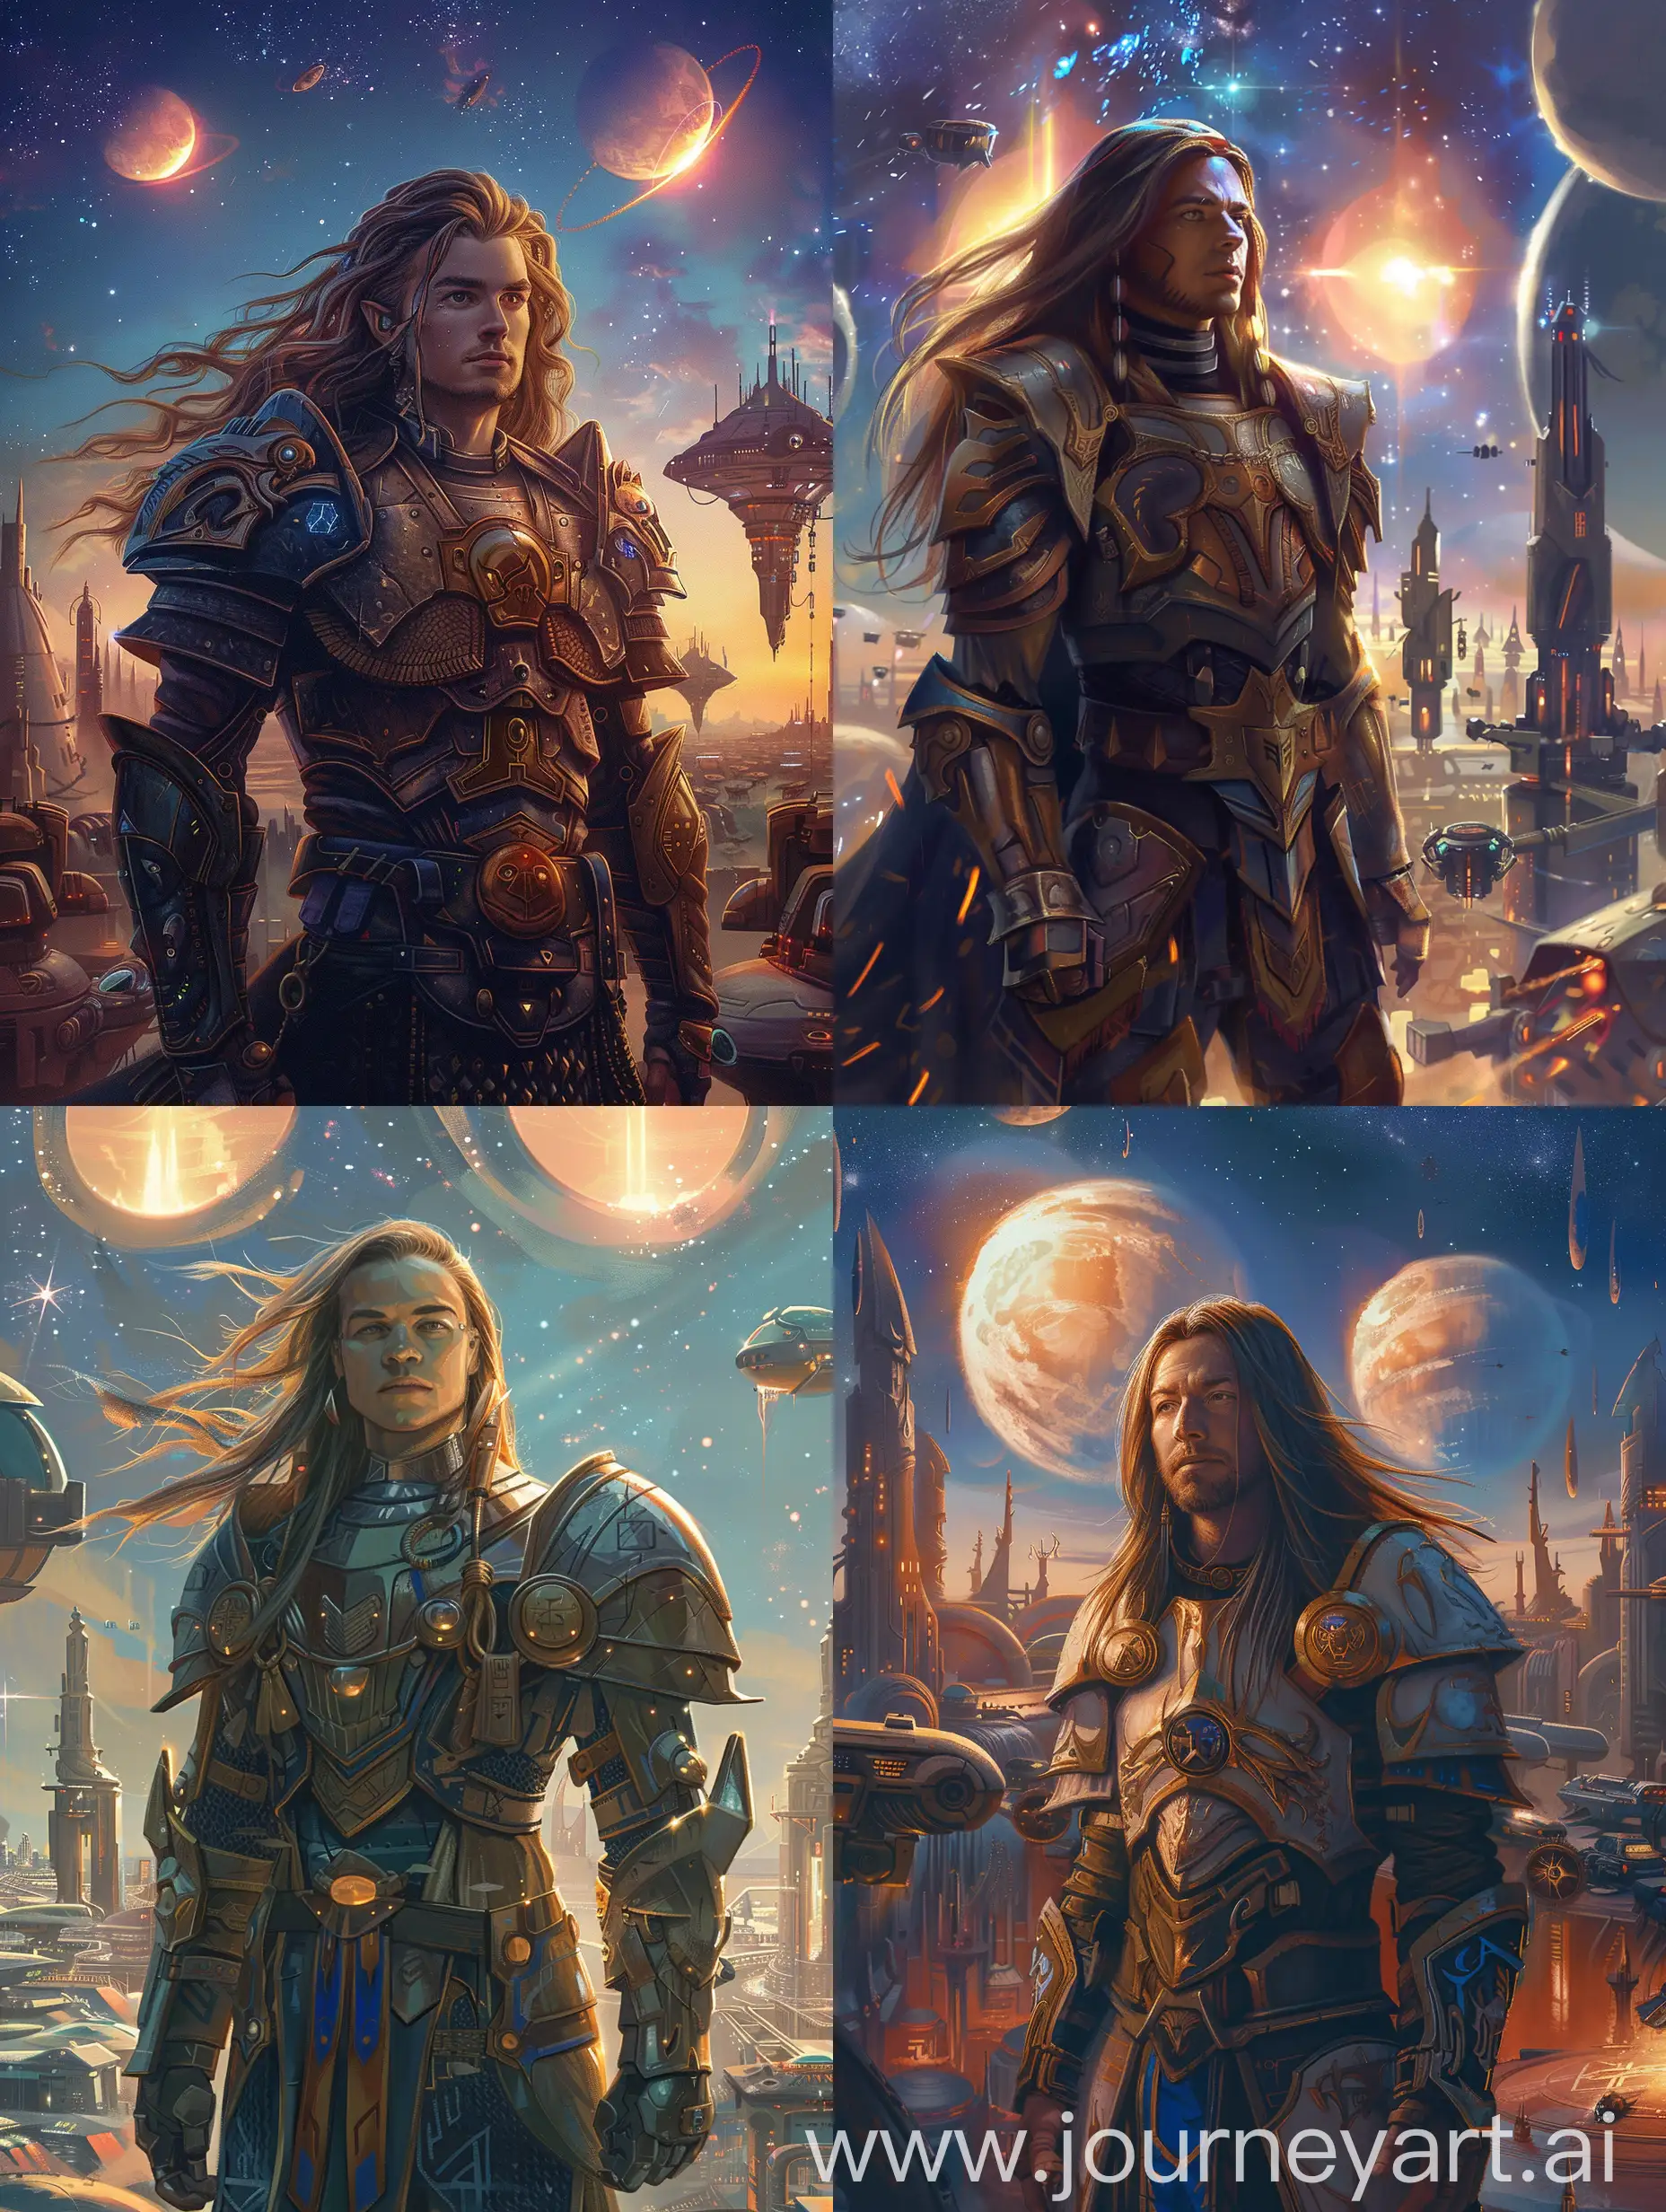 A portrait of Thorgal as a young warrior from an advanced alien civilization, standing proud in his traditional yet futuristic armor, under the glow of two alien suns. His features are noble and stoic, with long hair flowing in the alien wind, embodying both the warrior spirit and otherworldly elegance. His background is a sprawling alien cityscape, with towering spires and floating vehicles, under a star-filled sky. Created Using: digital painting, cinematic lighting, hyper-detailed textures, dual-tone lighting, sci-fi aesthetics, vibrant colors, intricate armor design, deep space ambiance --ar 3:4 --v 6.0